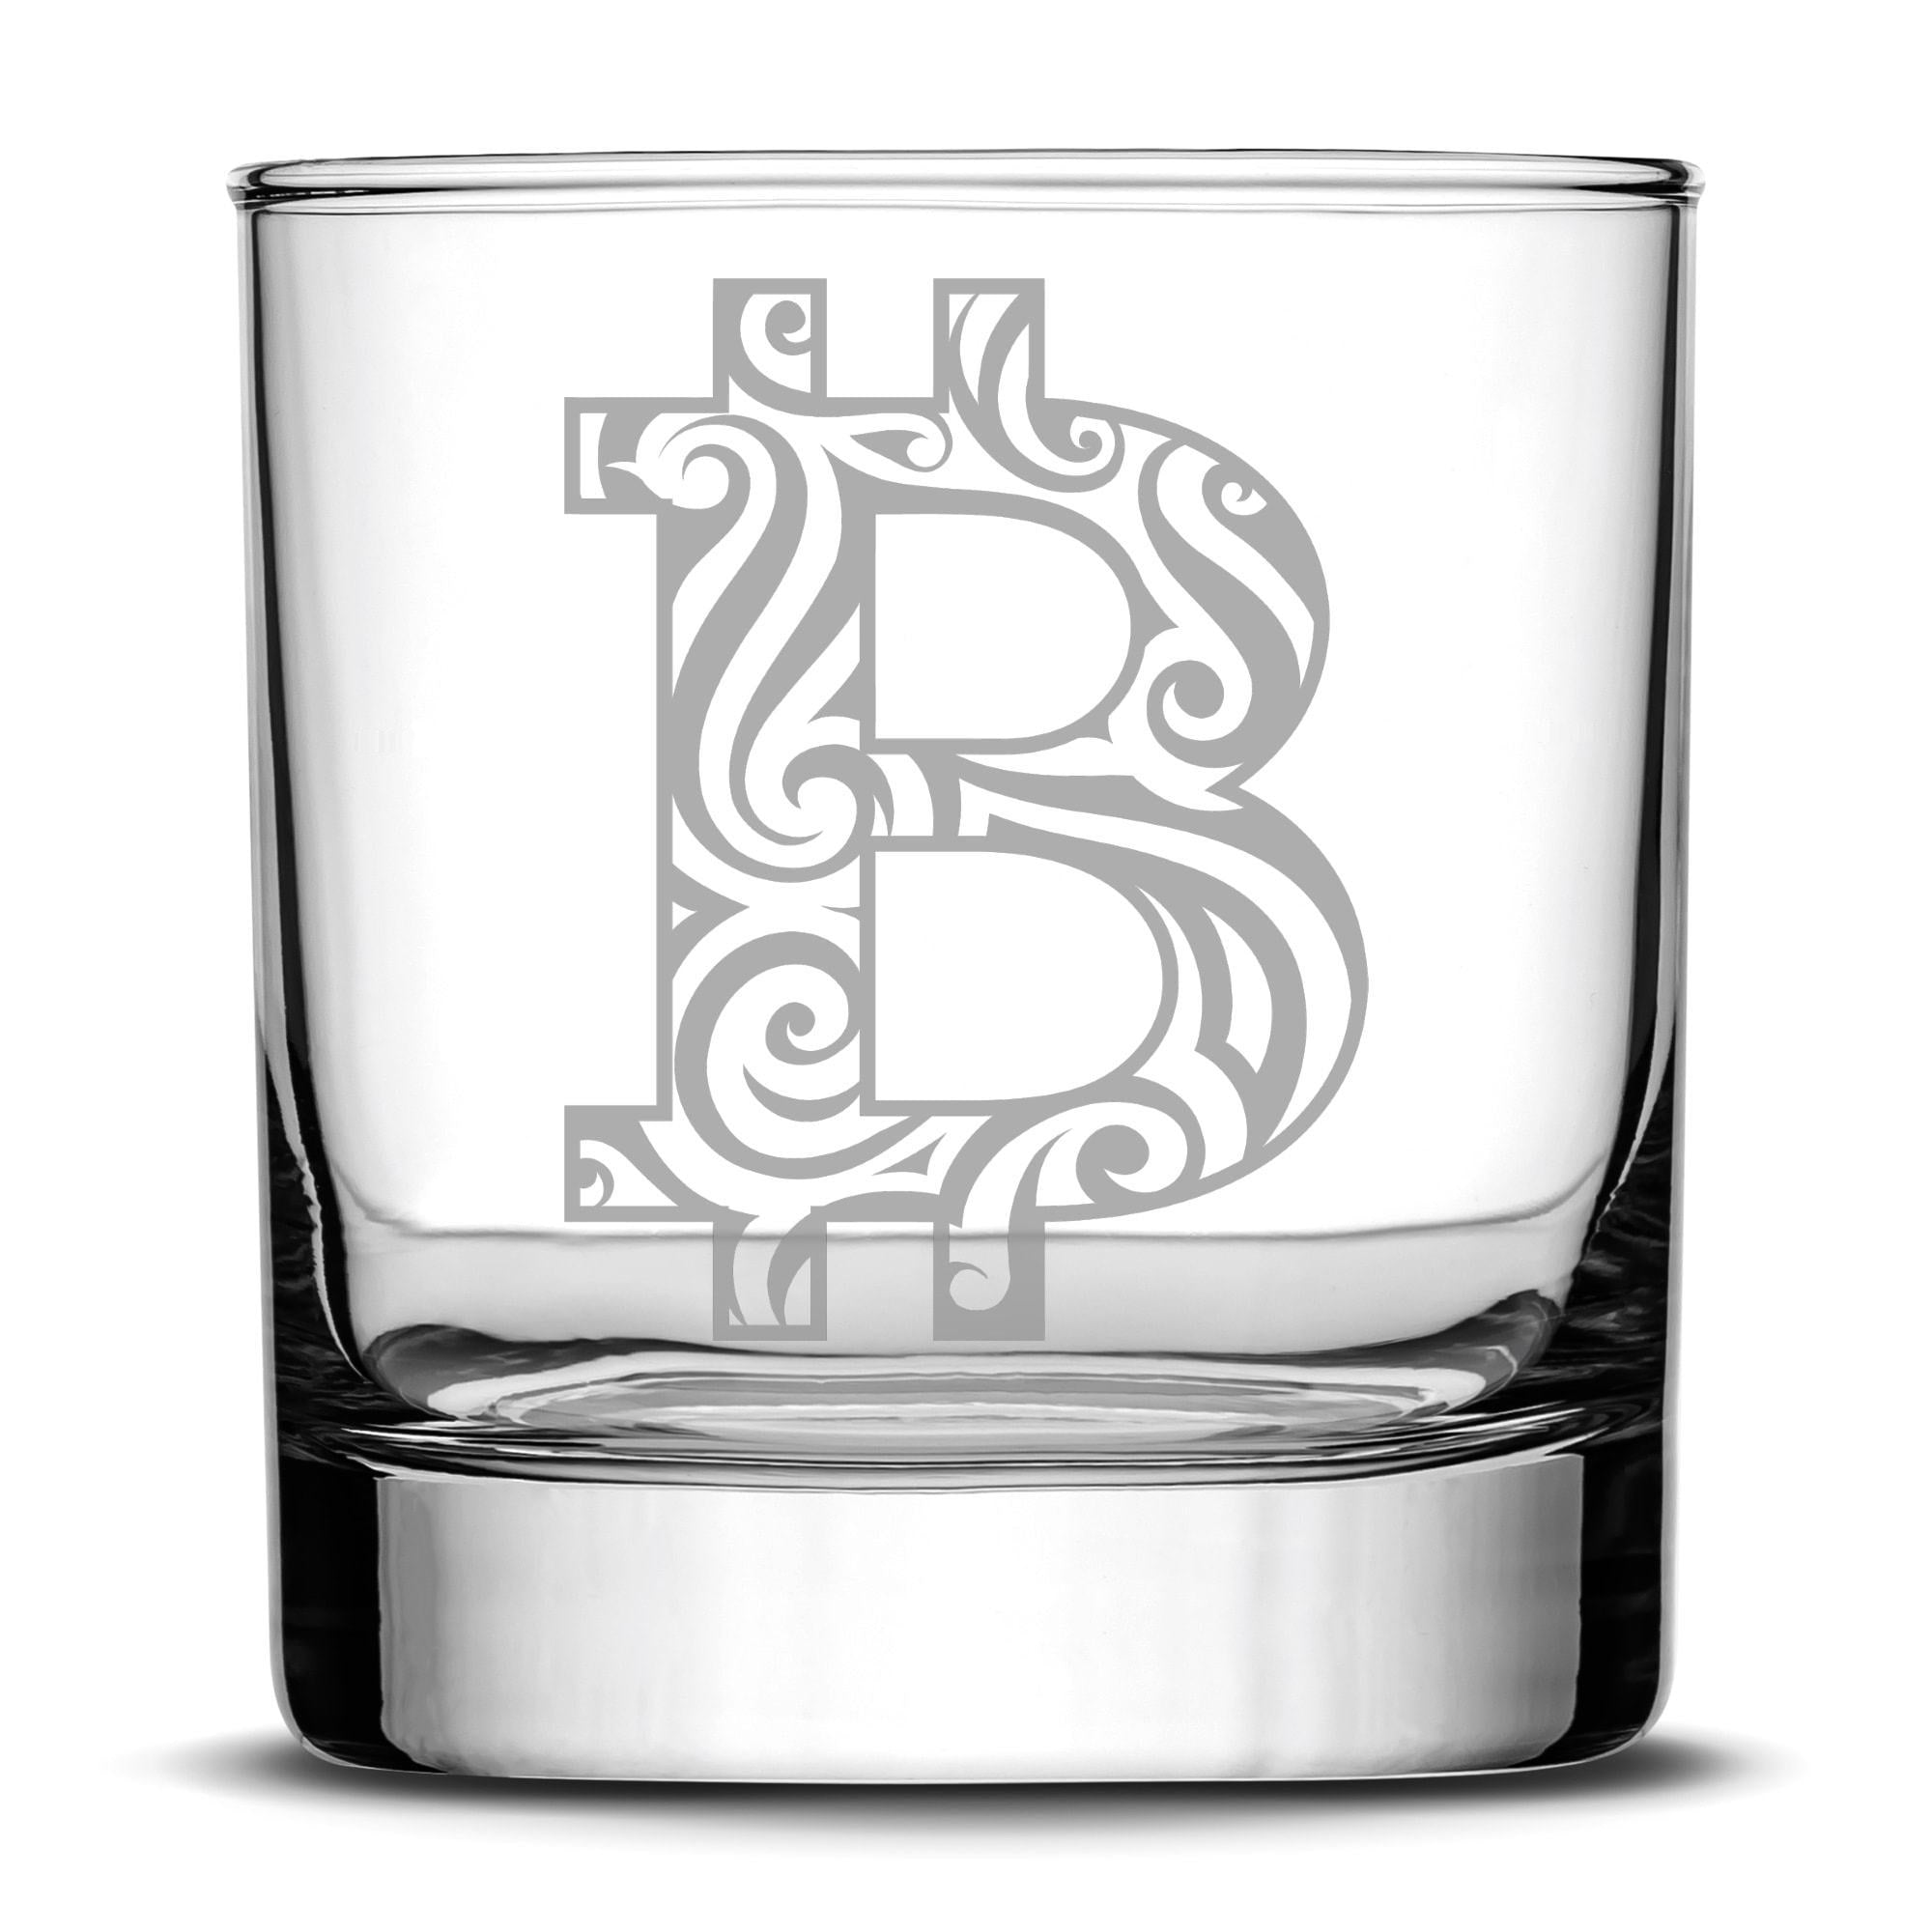 Premium Tribal Bitcoin Whiskey Glass, 10oz Deep Etched Rocks Glass, Made in USA by Integrity Bottles